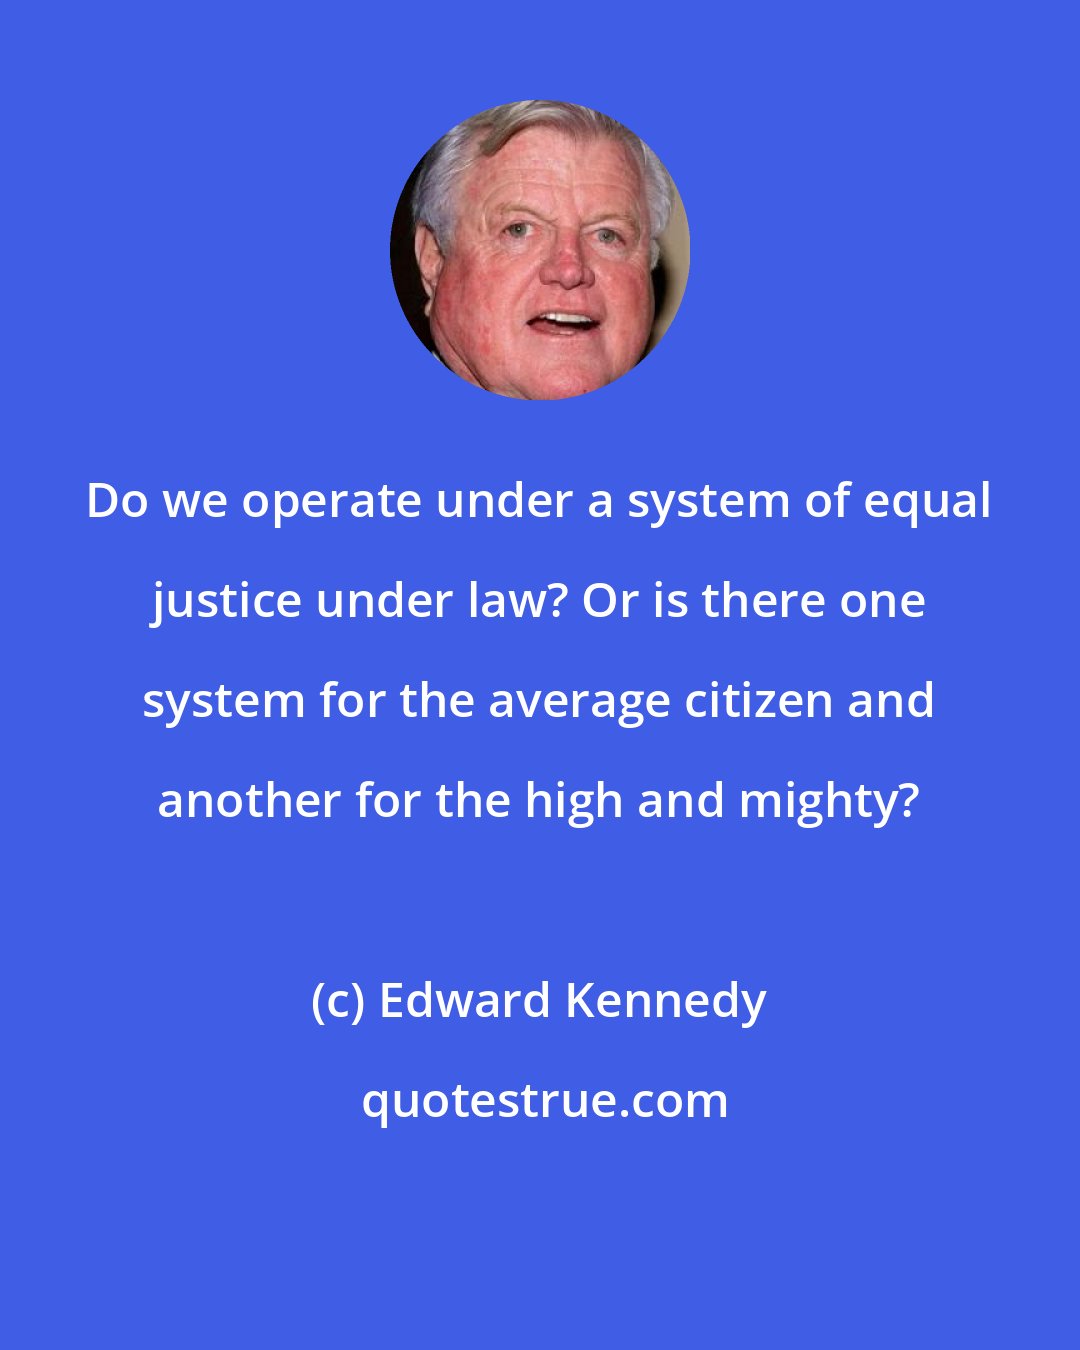 Edward Kennedy: Do we operate under a system of equal justice under law? Or is there one system for the average citizen and another for the high and mighty?